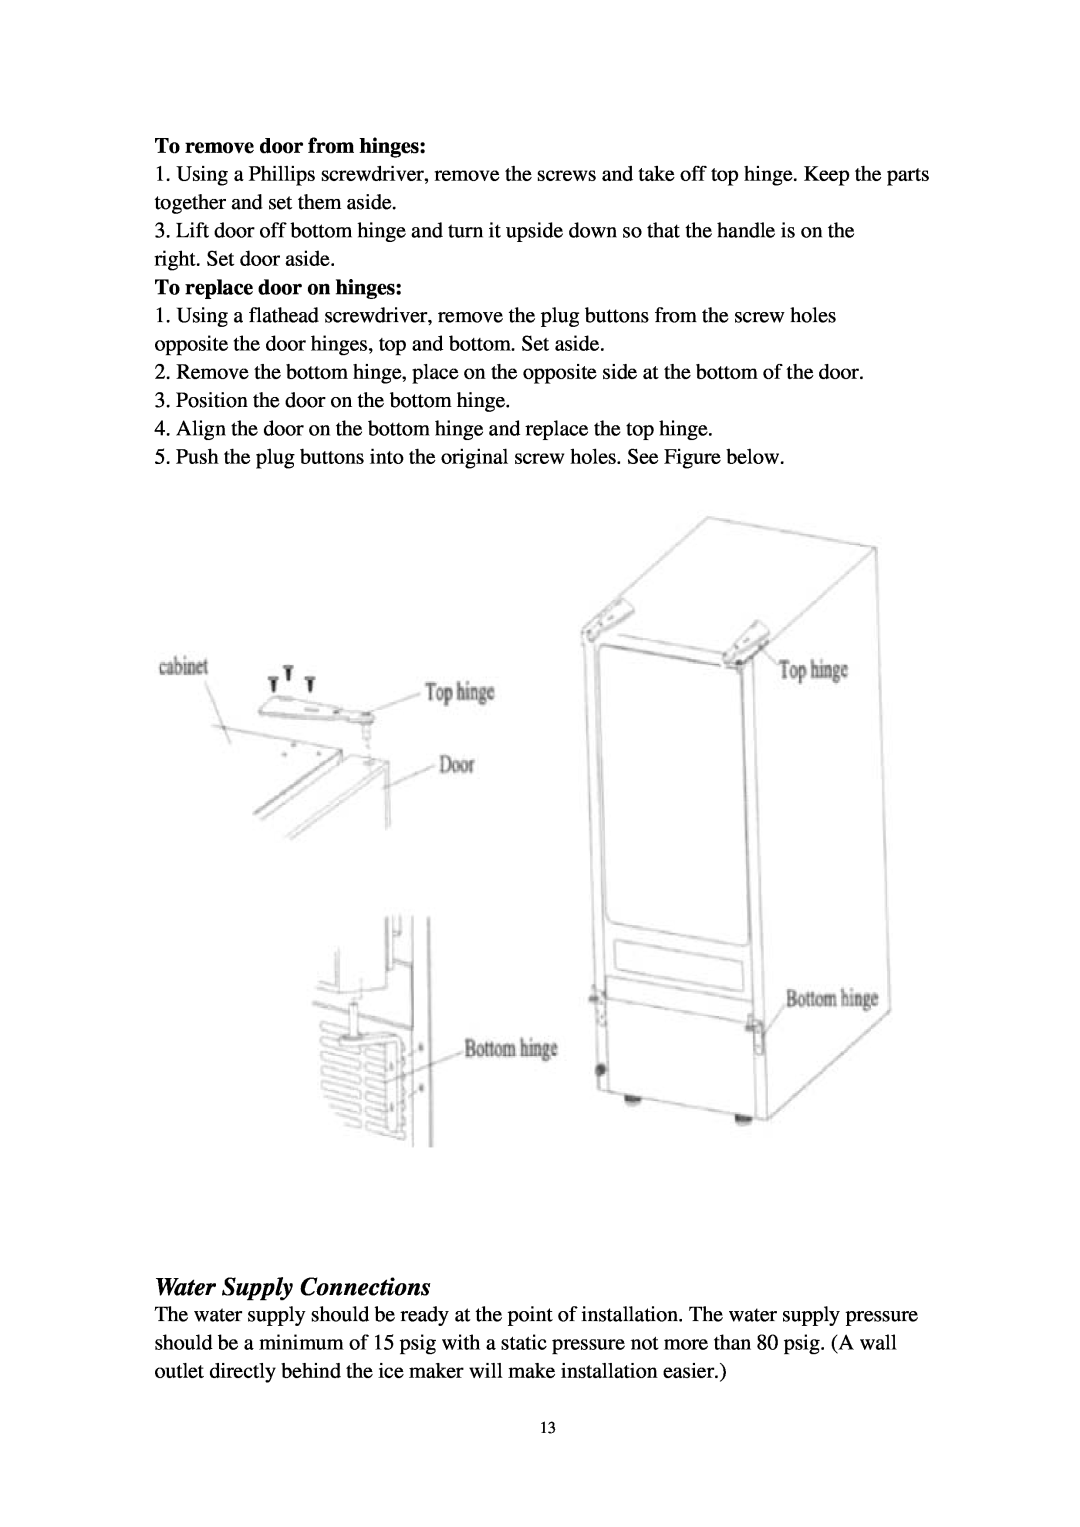 EdgeStar IB450SS owner manual Water Supply Connections, To remove door from hinges, To replace door on hinges 